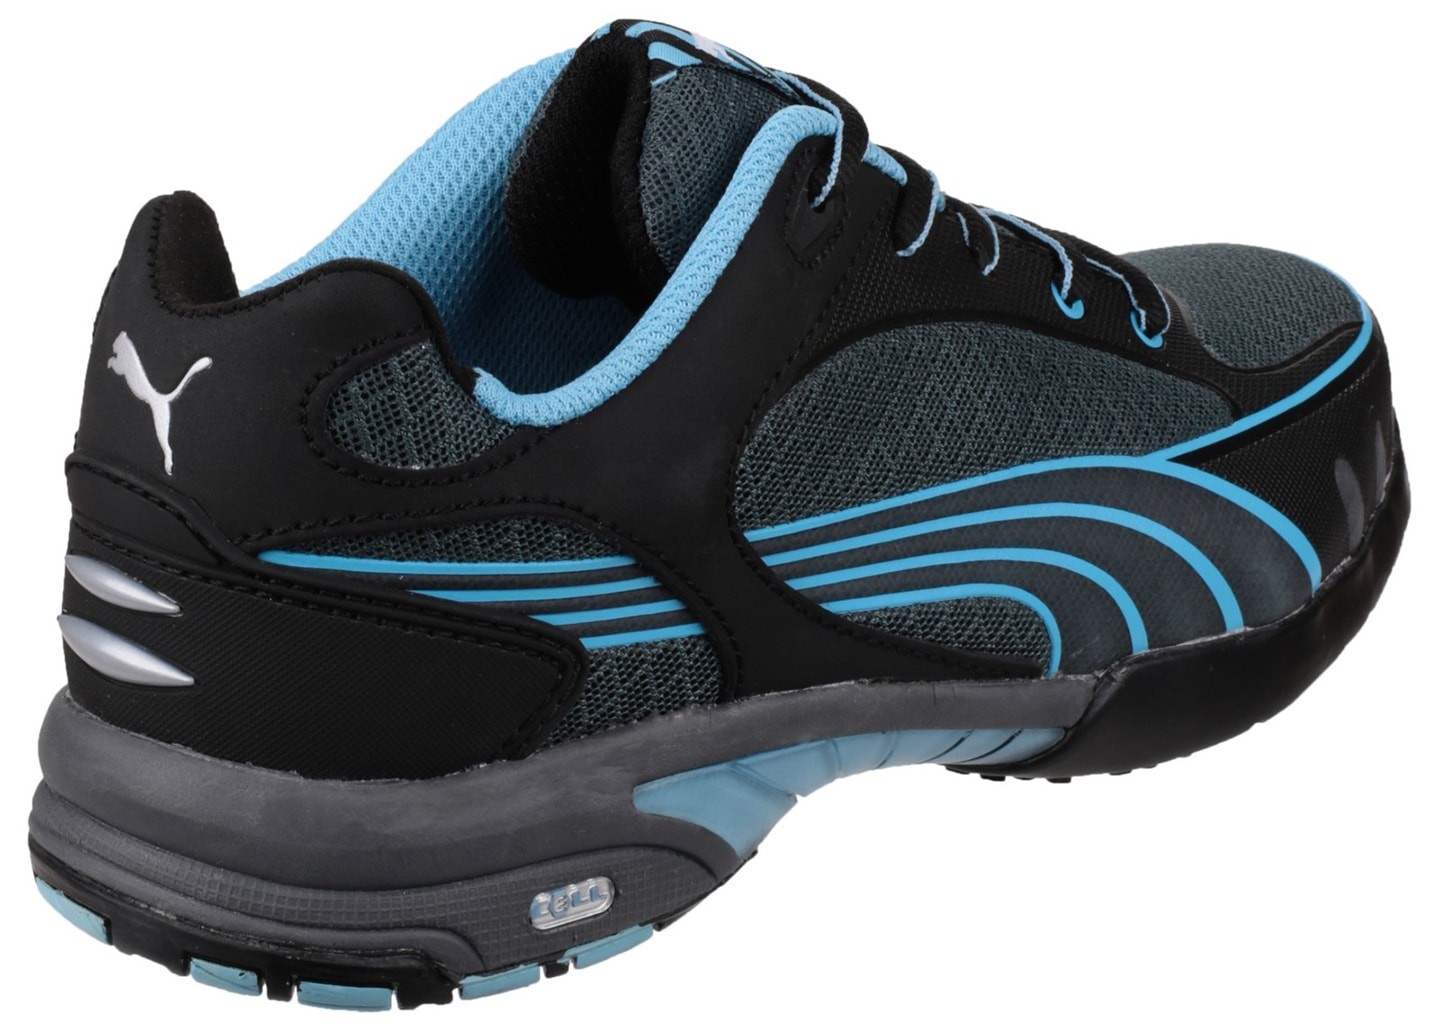 Fuse Motion Womens Safety Shoe